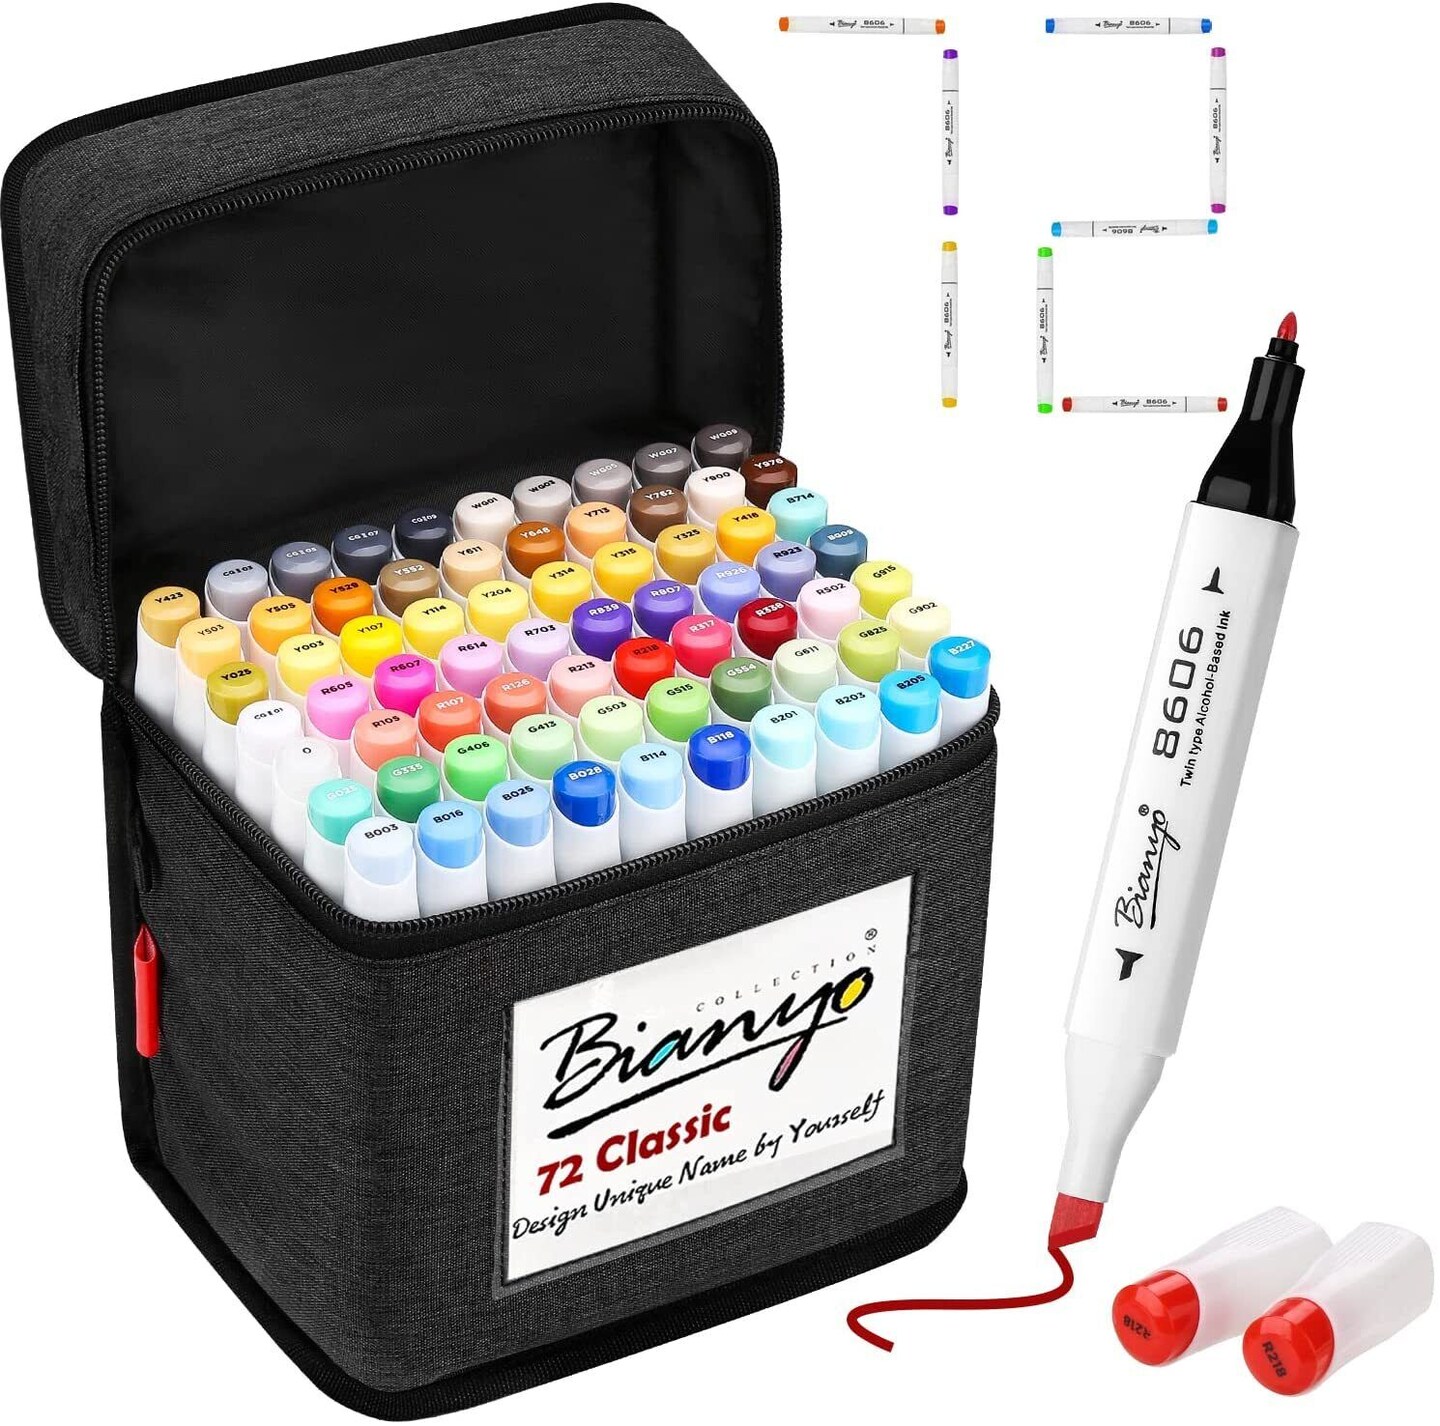 Artfinity Sketch Marker Sets - Vibrant, Professional, Dye-Based Alcohol  Markers for Artists, Students, Drawing, Travel, & More!